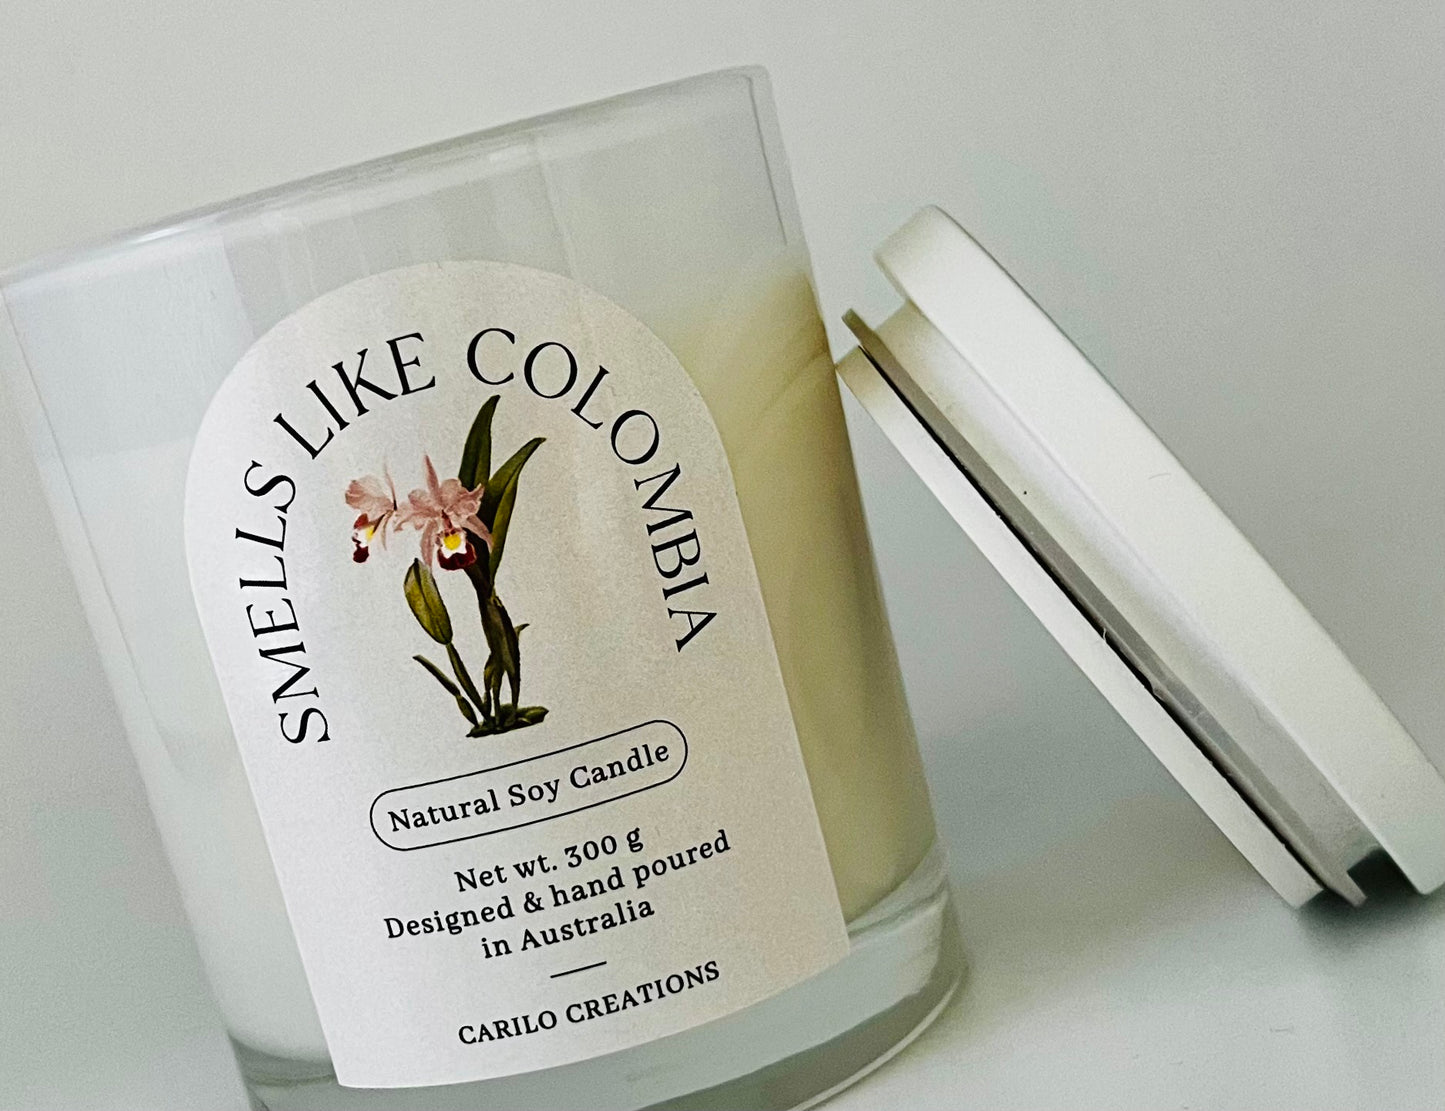 "SMELLS LIKE COLOMBIA" SCENTED CANDLE- WHITE JAR 300g